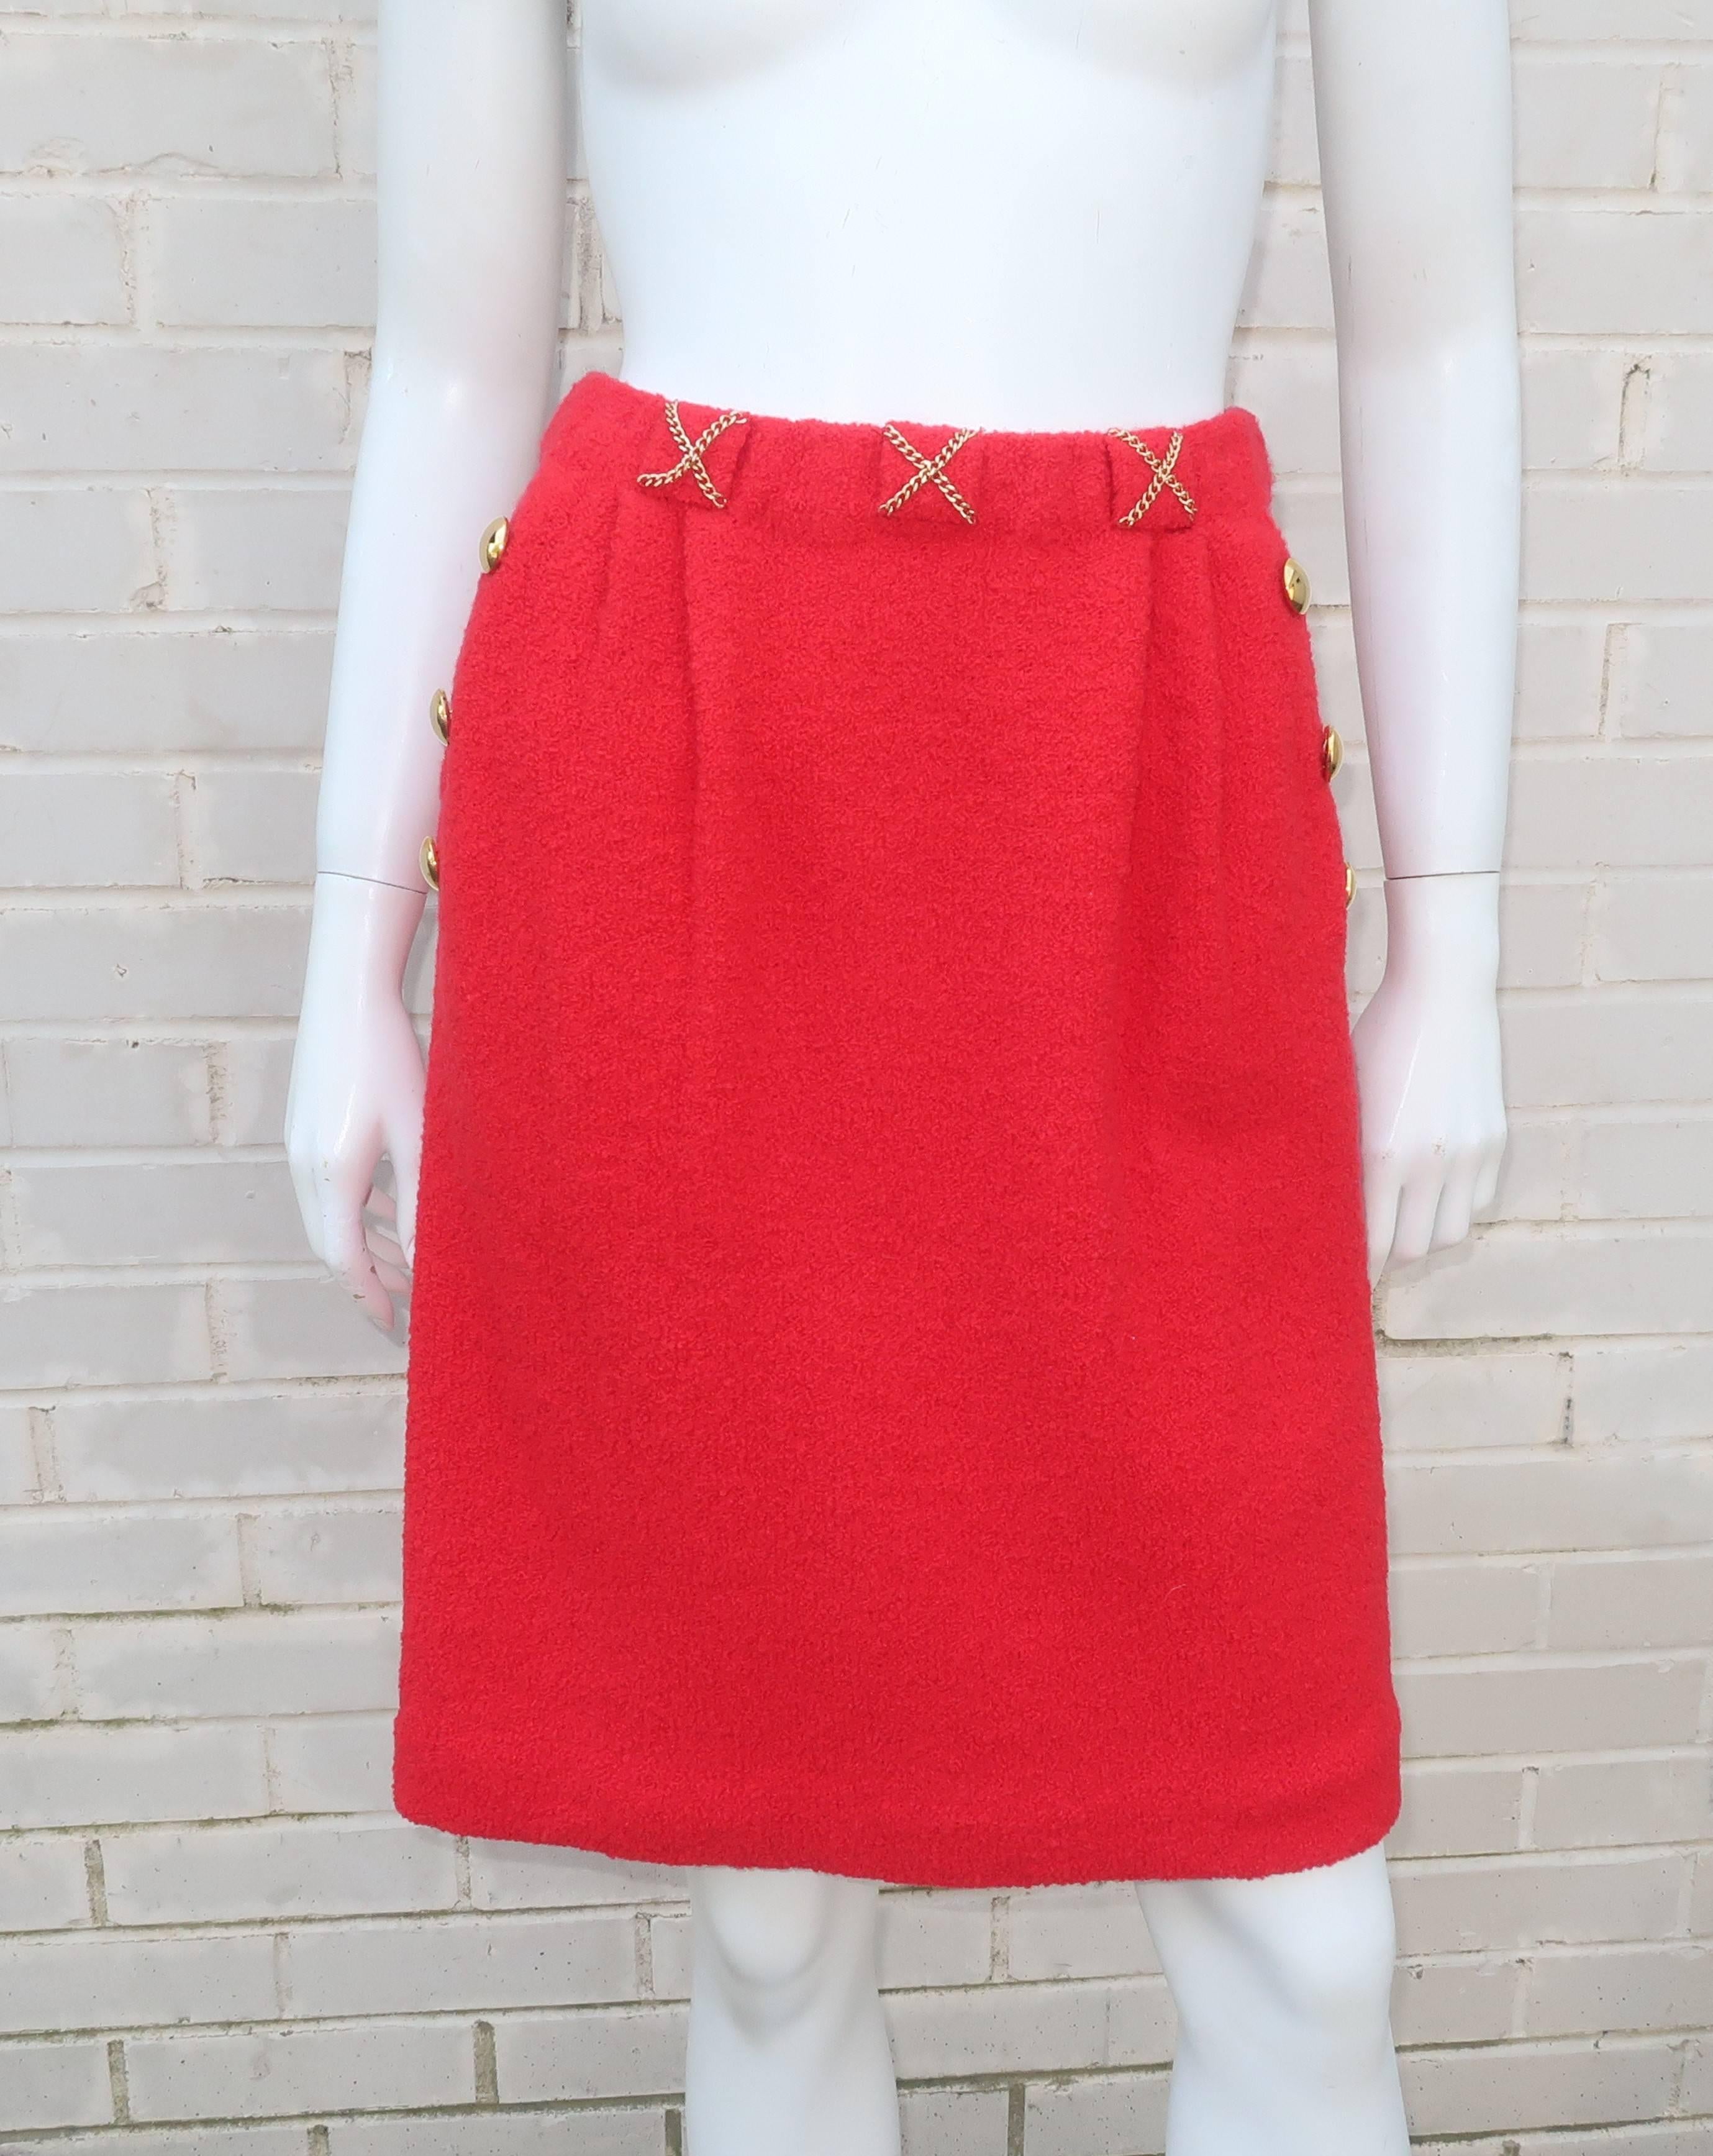 Adolfo Red Boucle Knit Skirt Suit With Chain Details, 1980s 6